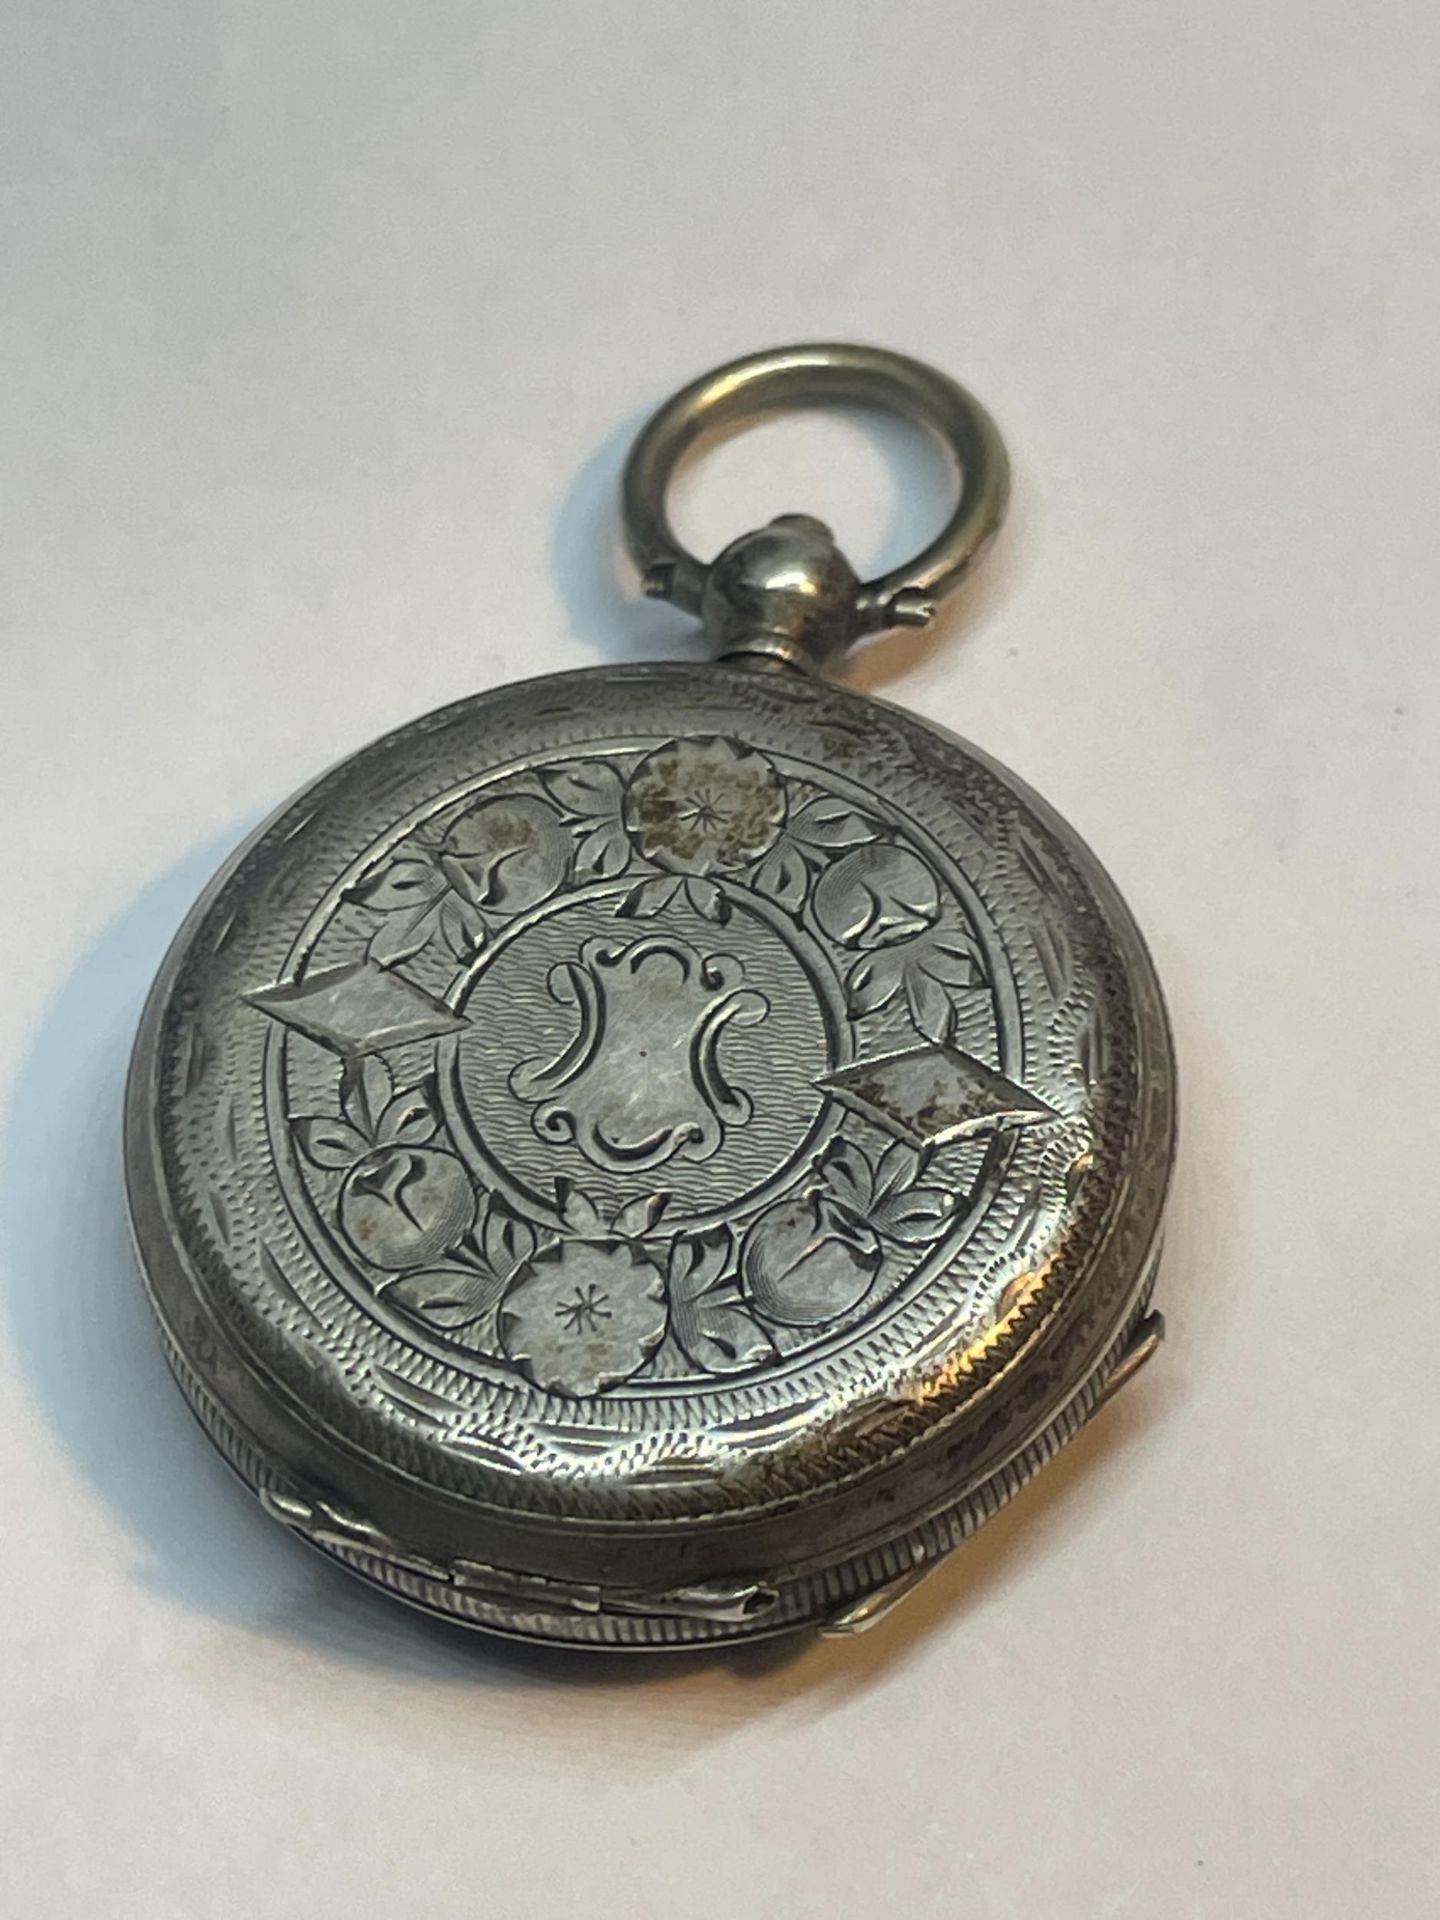 A MARKED 800 SILVER POCKET WATCH WITH WHITE ENAMEL DECORATIVE FACE AND ROMAN NUMERALS - Image 2 of 3